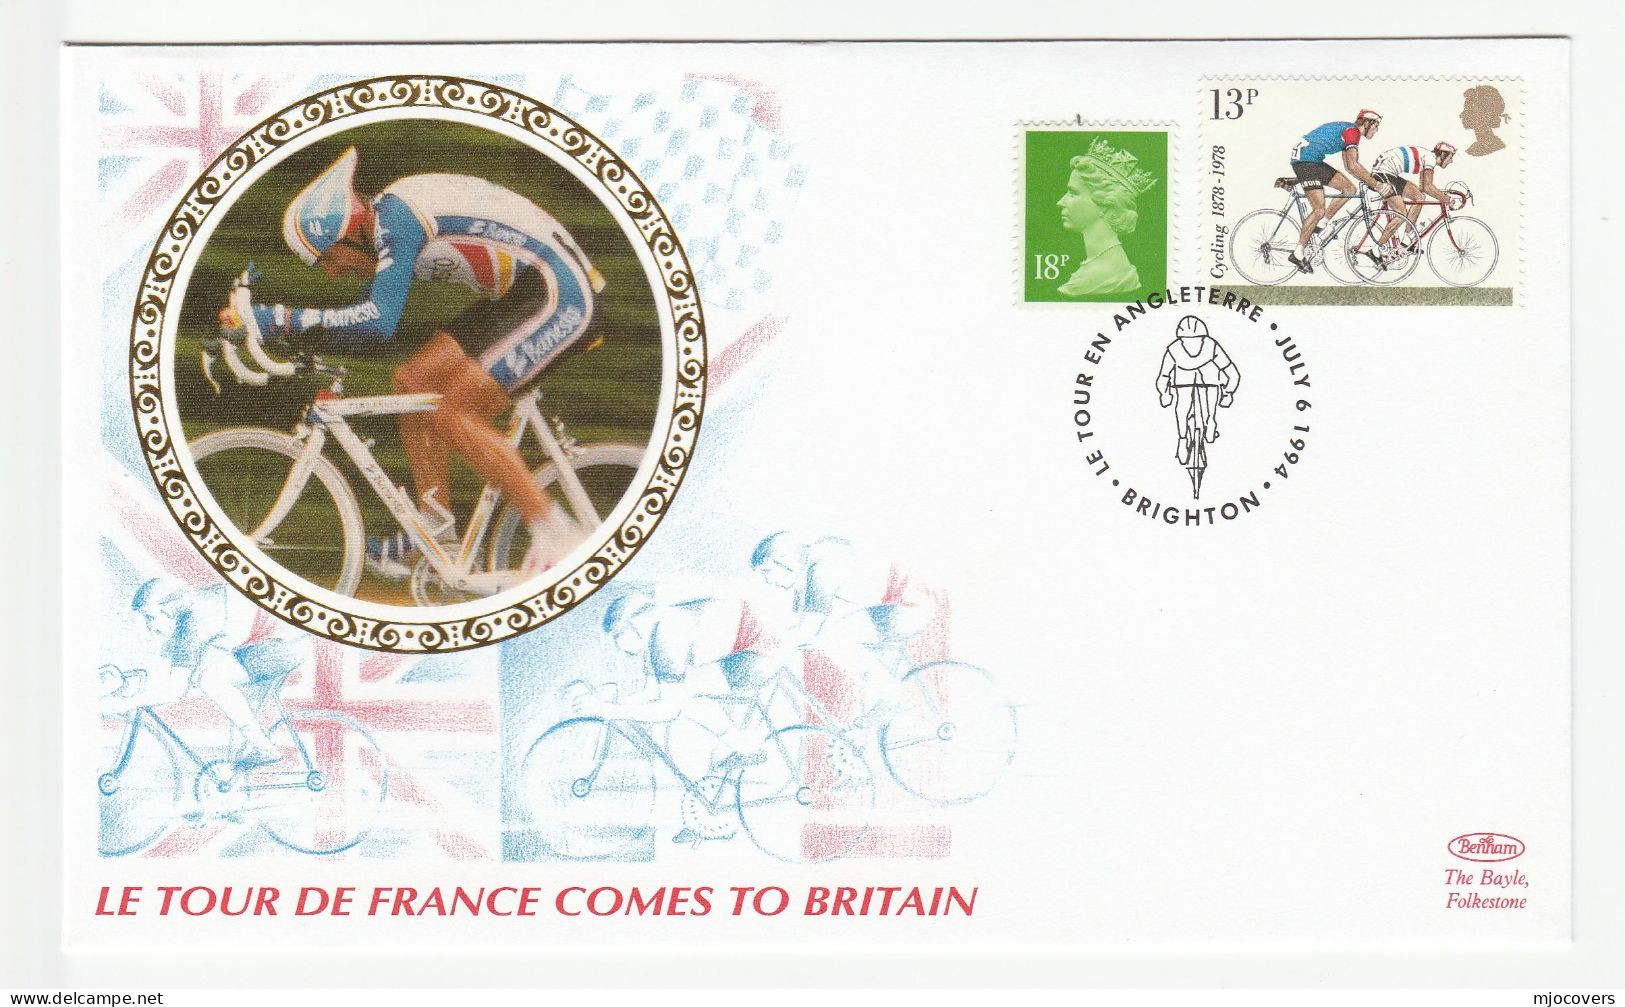 CYCLING Special SILK 1994 TOUR DE FRANCE In BRITAIN BRIGHTON Event COVER Gb Stamps Bicycle Bike Sport - Cycling